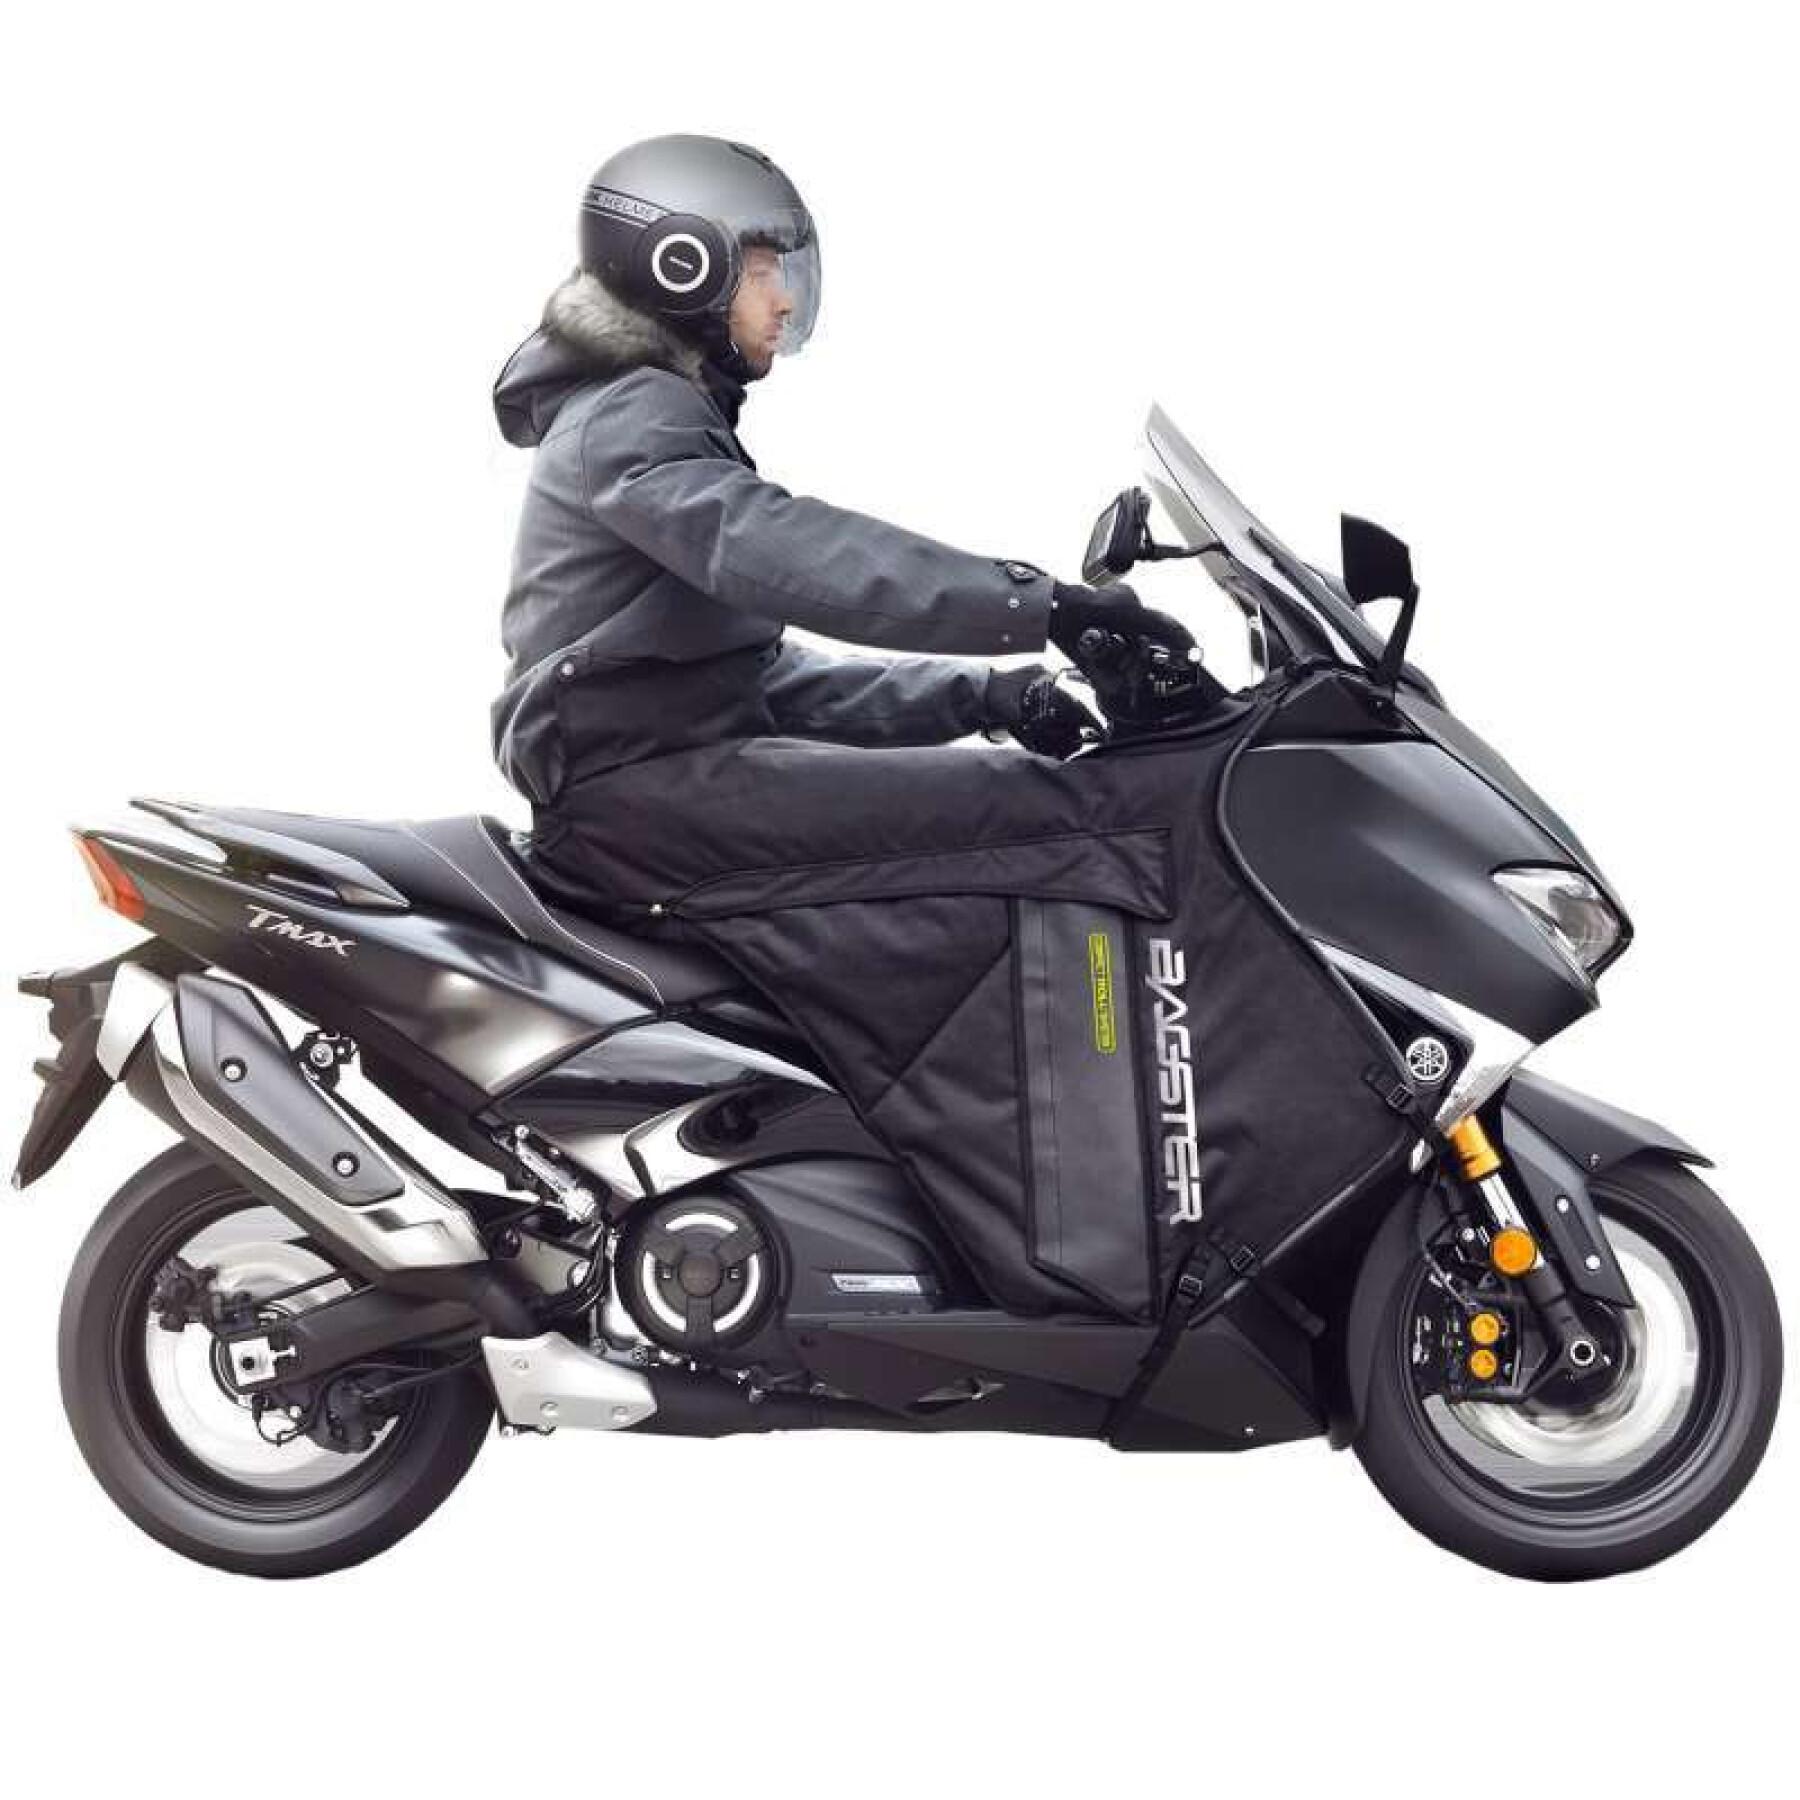 Scooter apron Bagster Roll'Ster Honda Pcx 125 2019-2020